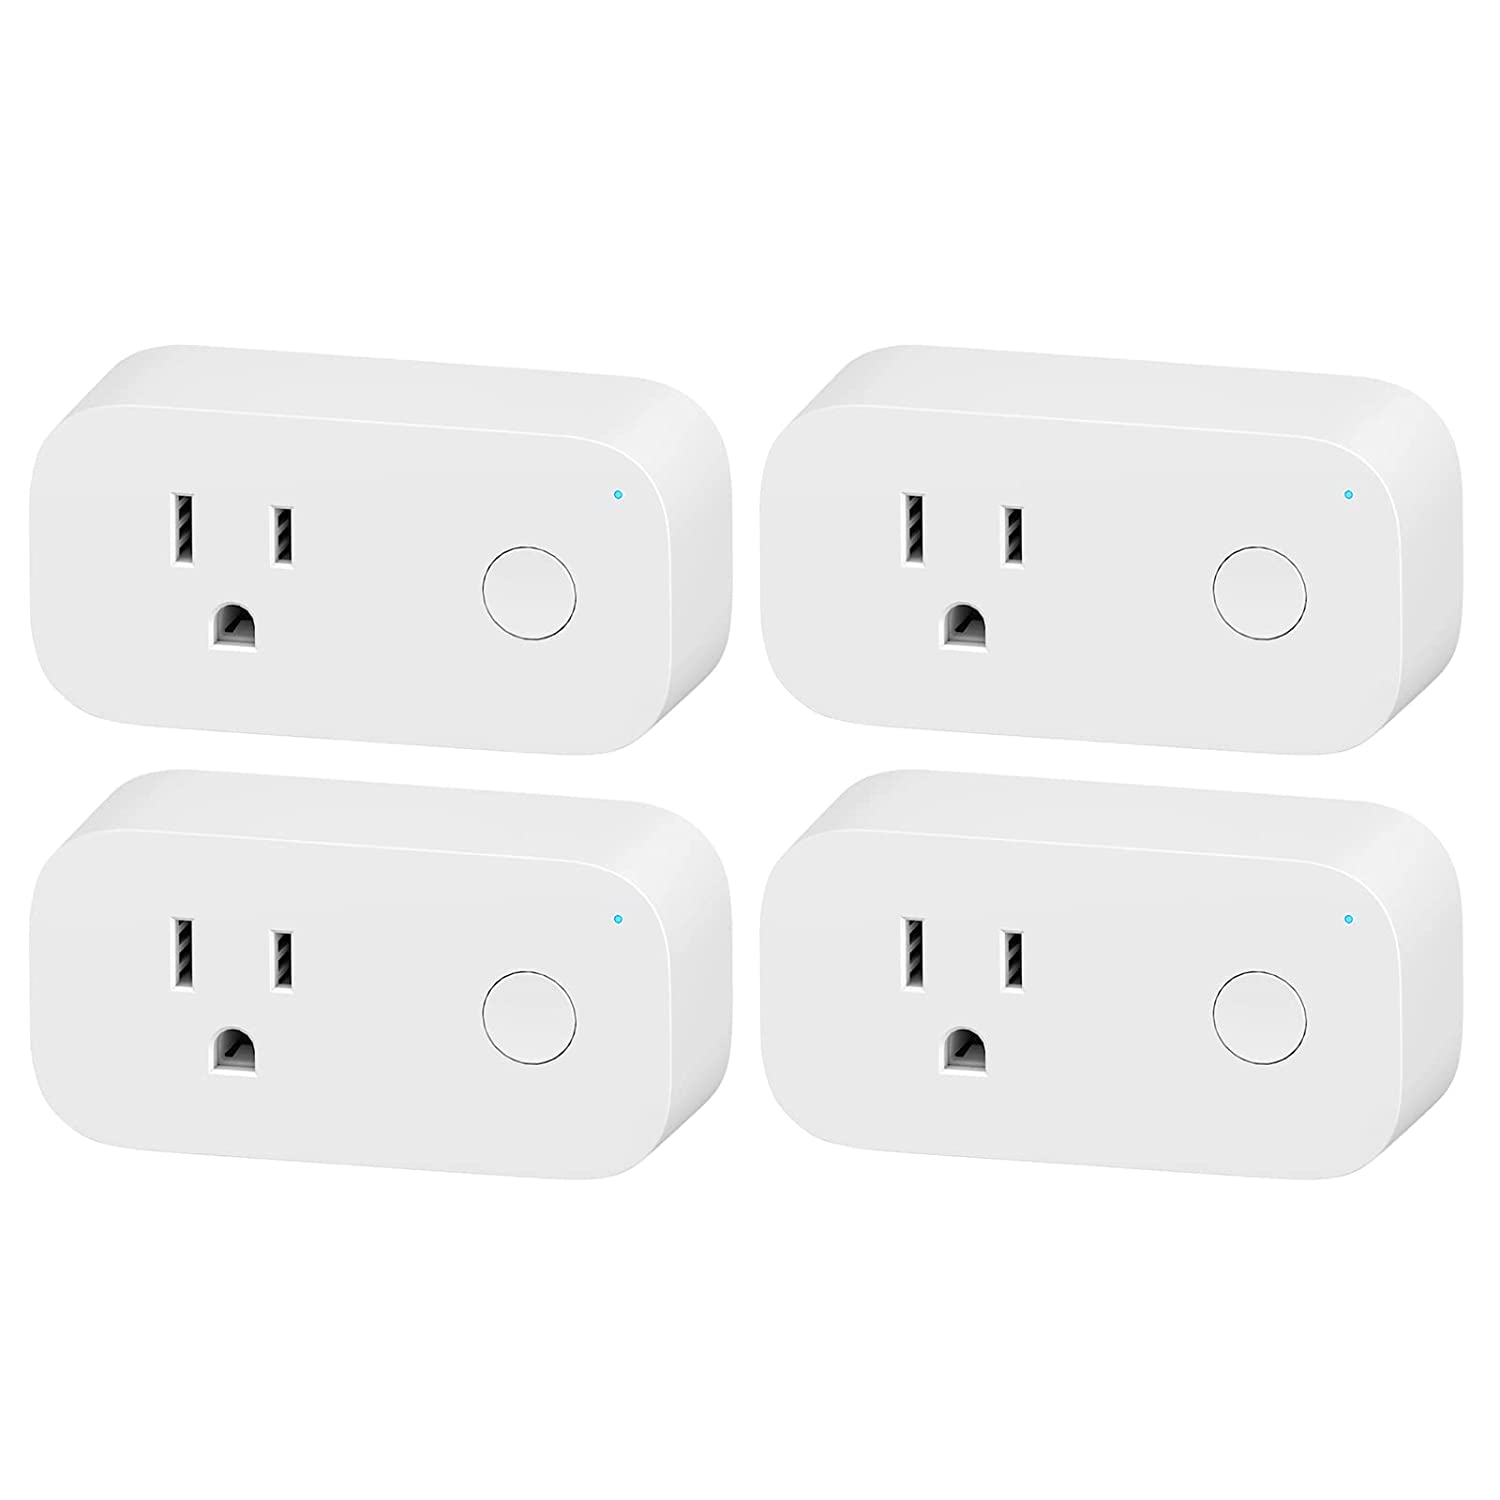 BN-LINK Smart Power Strip Compatible with Alexa Google Home, Smart Plug  WiFi Outlets Surge Protector with 4 USB 6 Charging Port Multi Plug